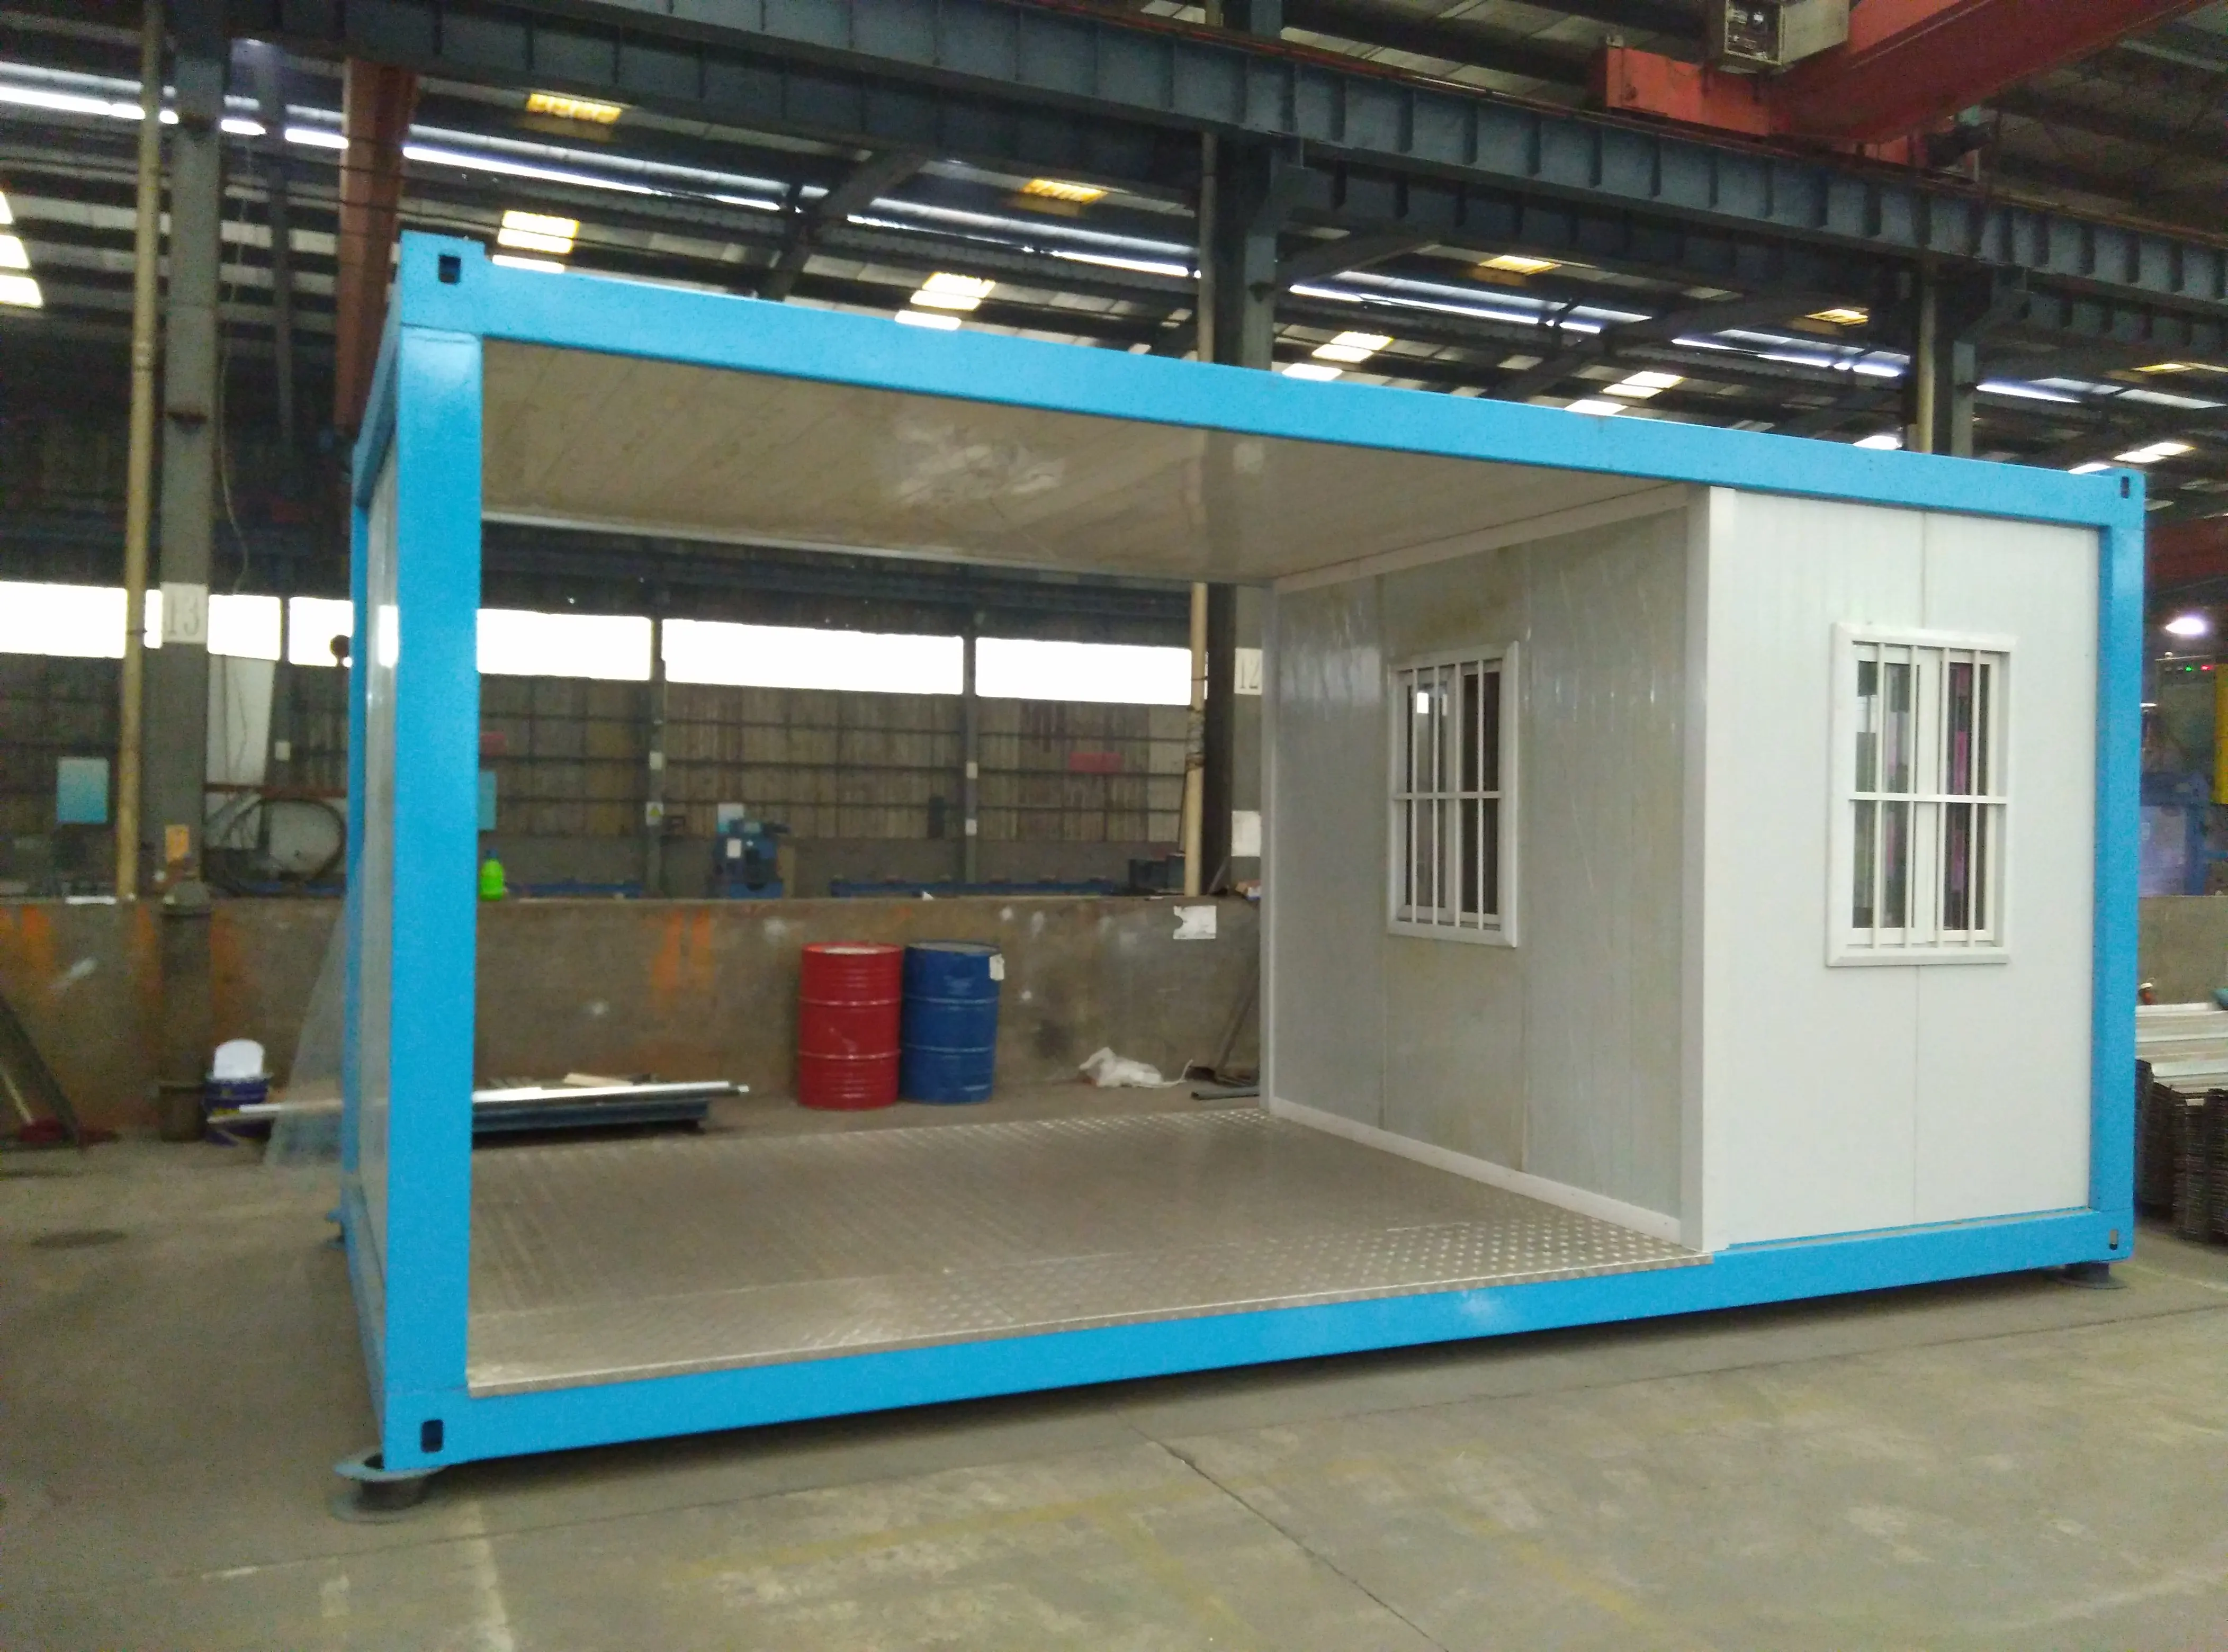 Lida Group using shipping containers to build homes shipped to business used as booth, toilet, storage room-27